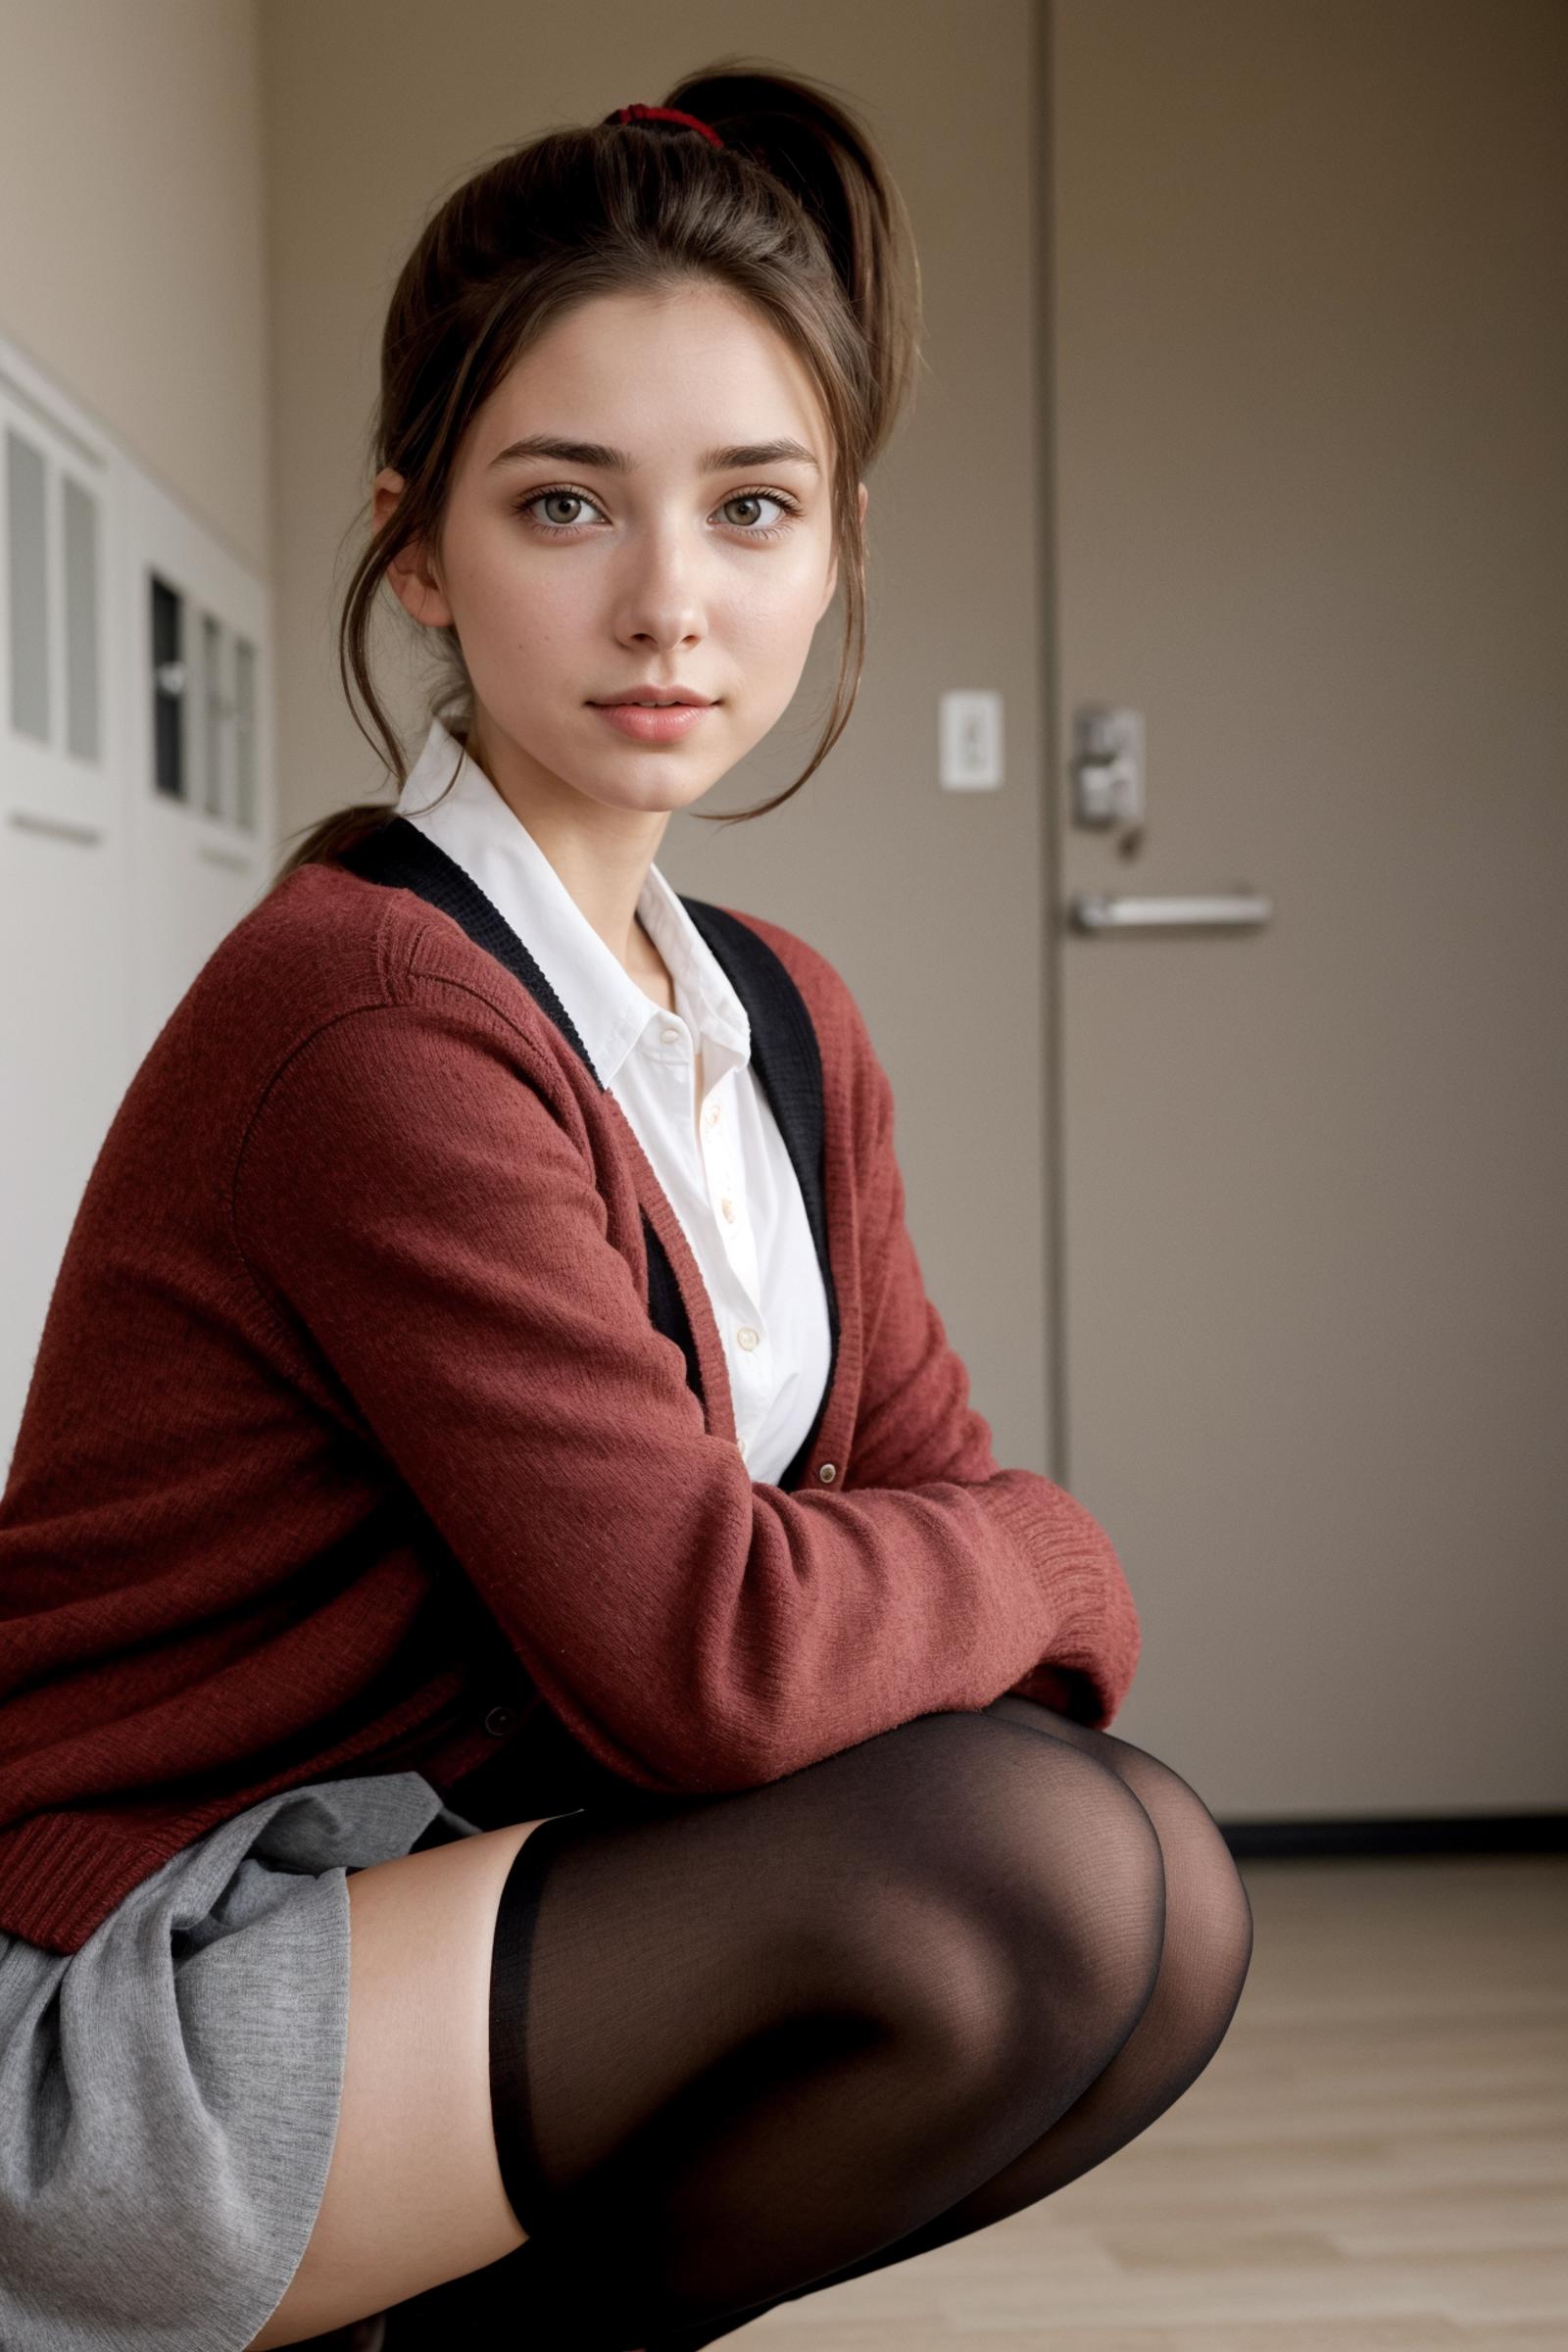 A young woman wearing a red sweater, white shirt, and black skirt.